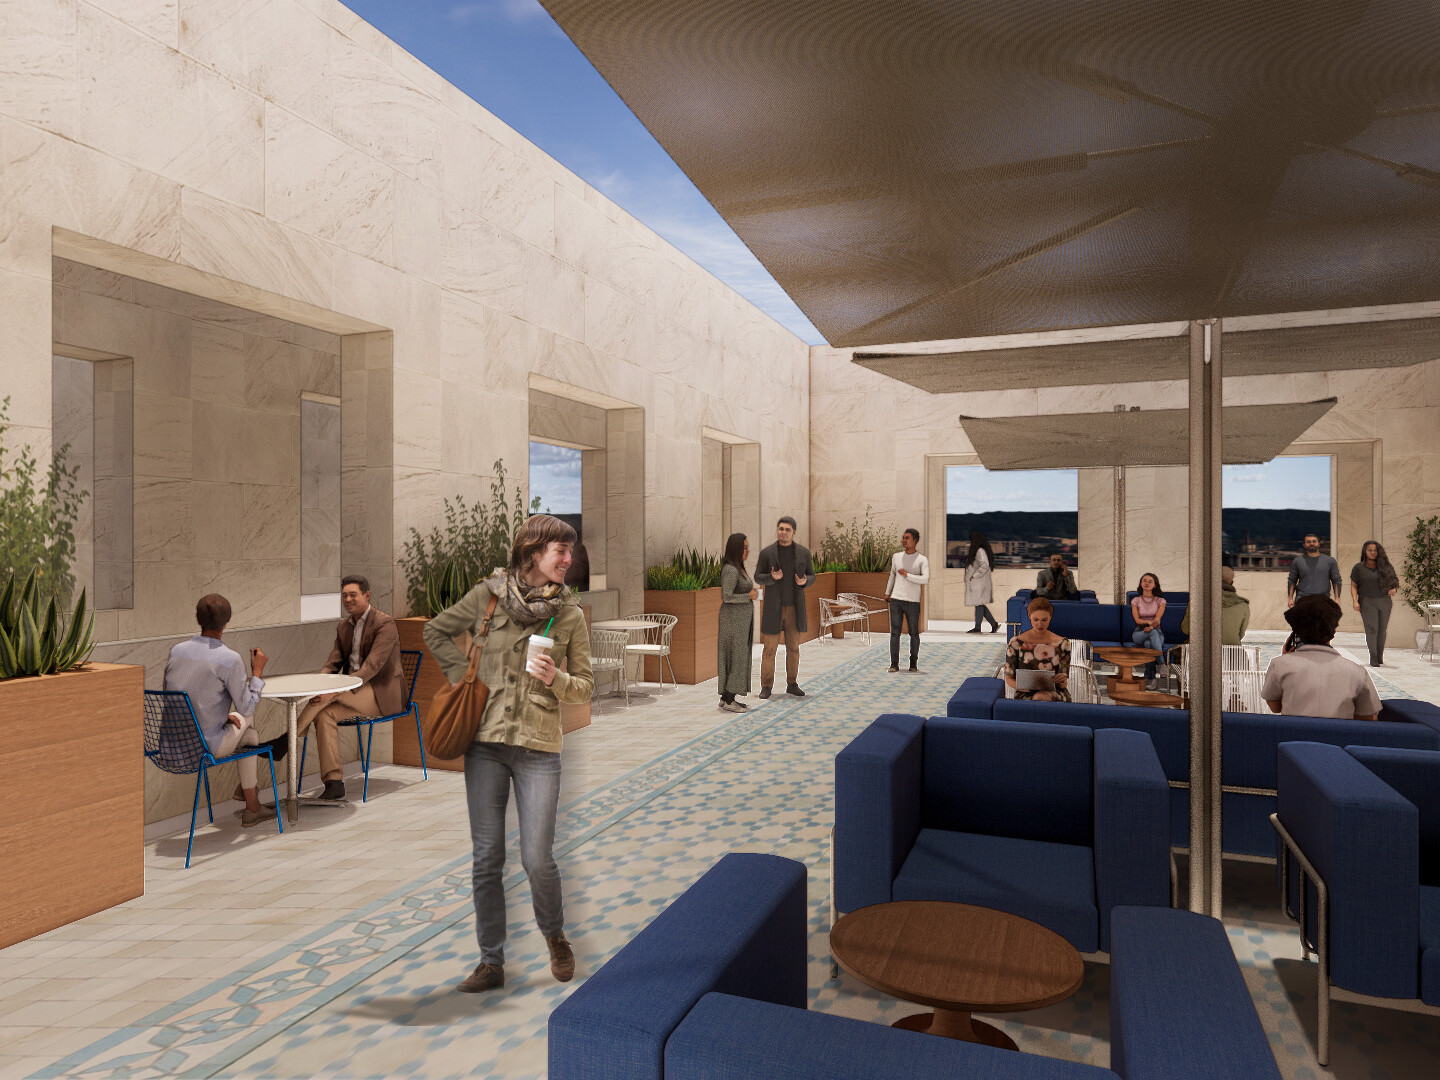 A courtyard or terrace area. The space features a combination of comfortable seating and dining areas, with blue sofas and wooden tables arranged under shaded canopies.